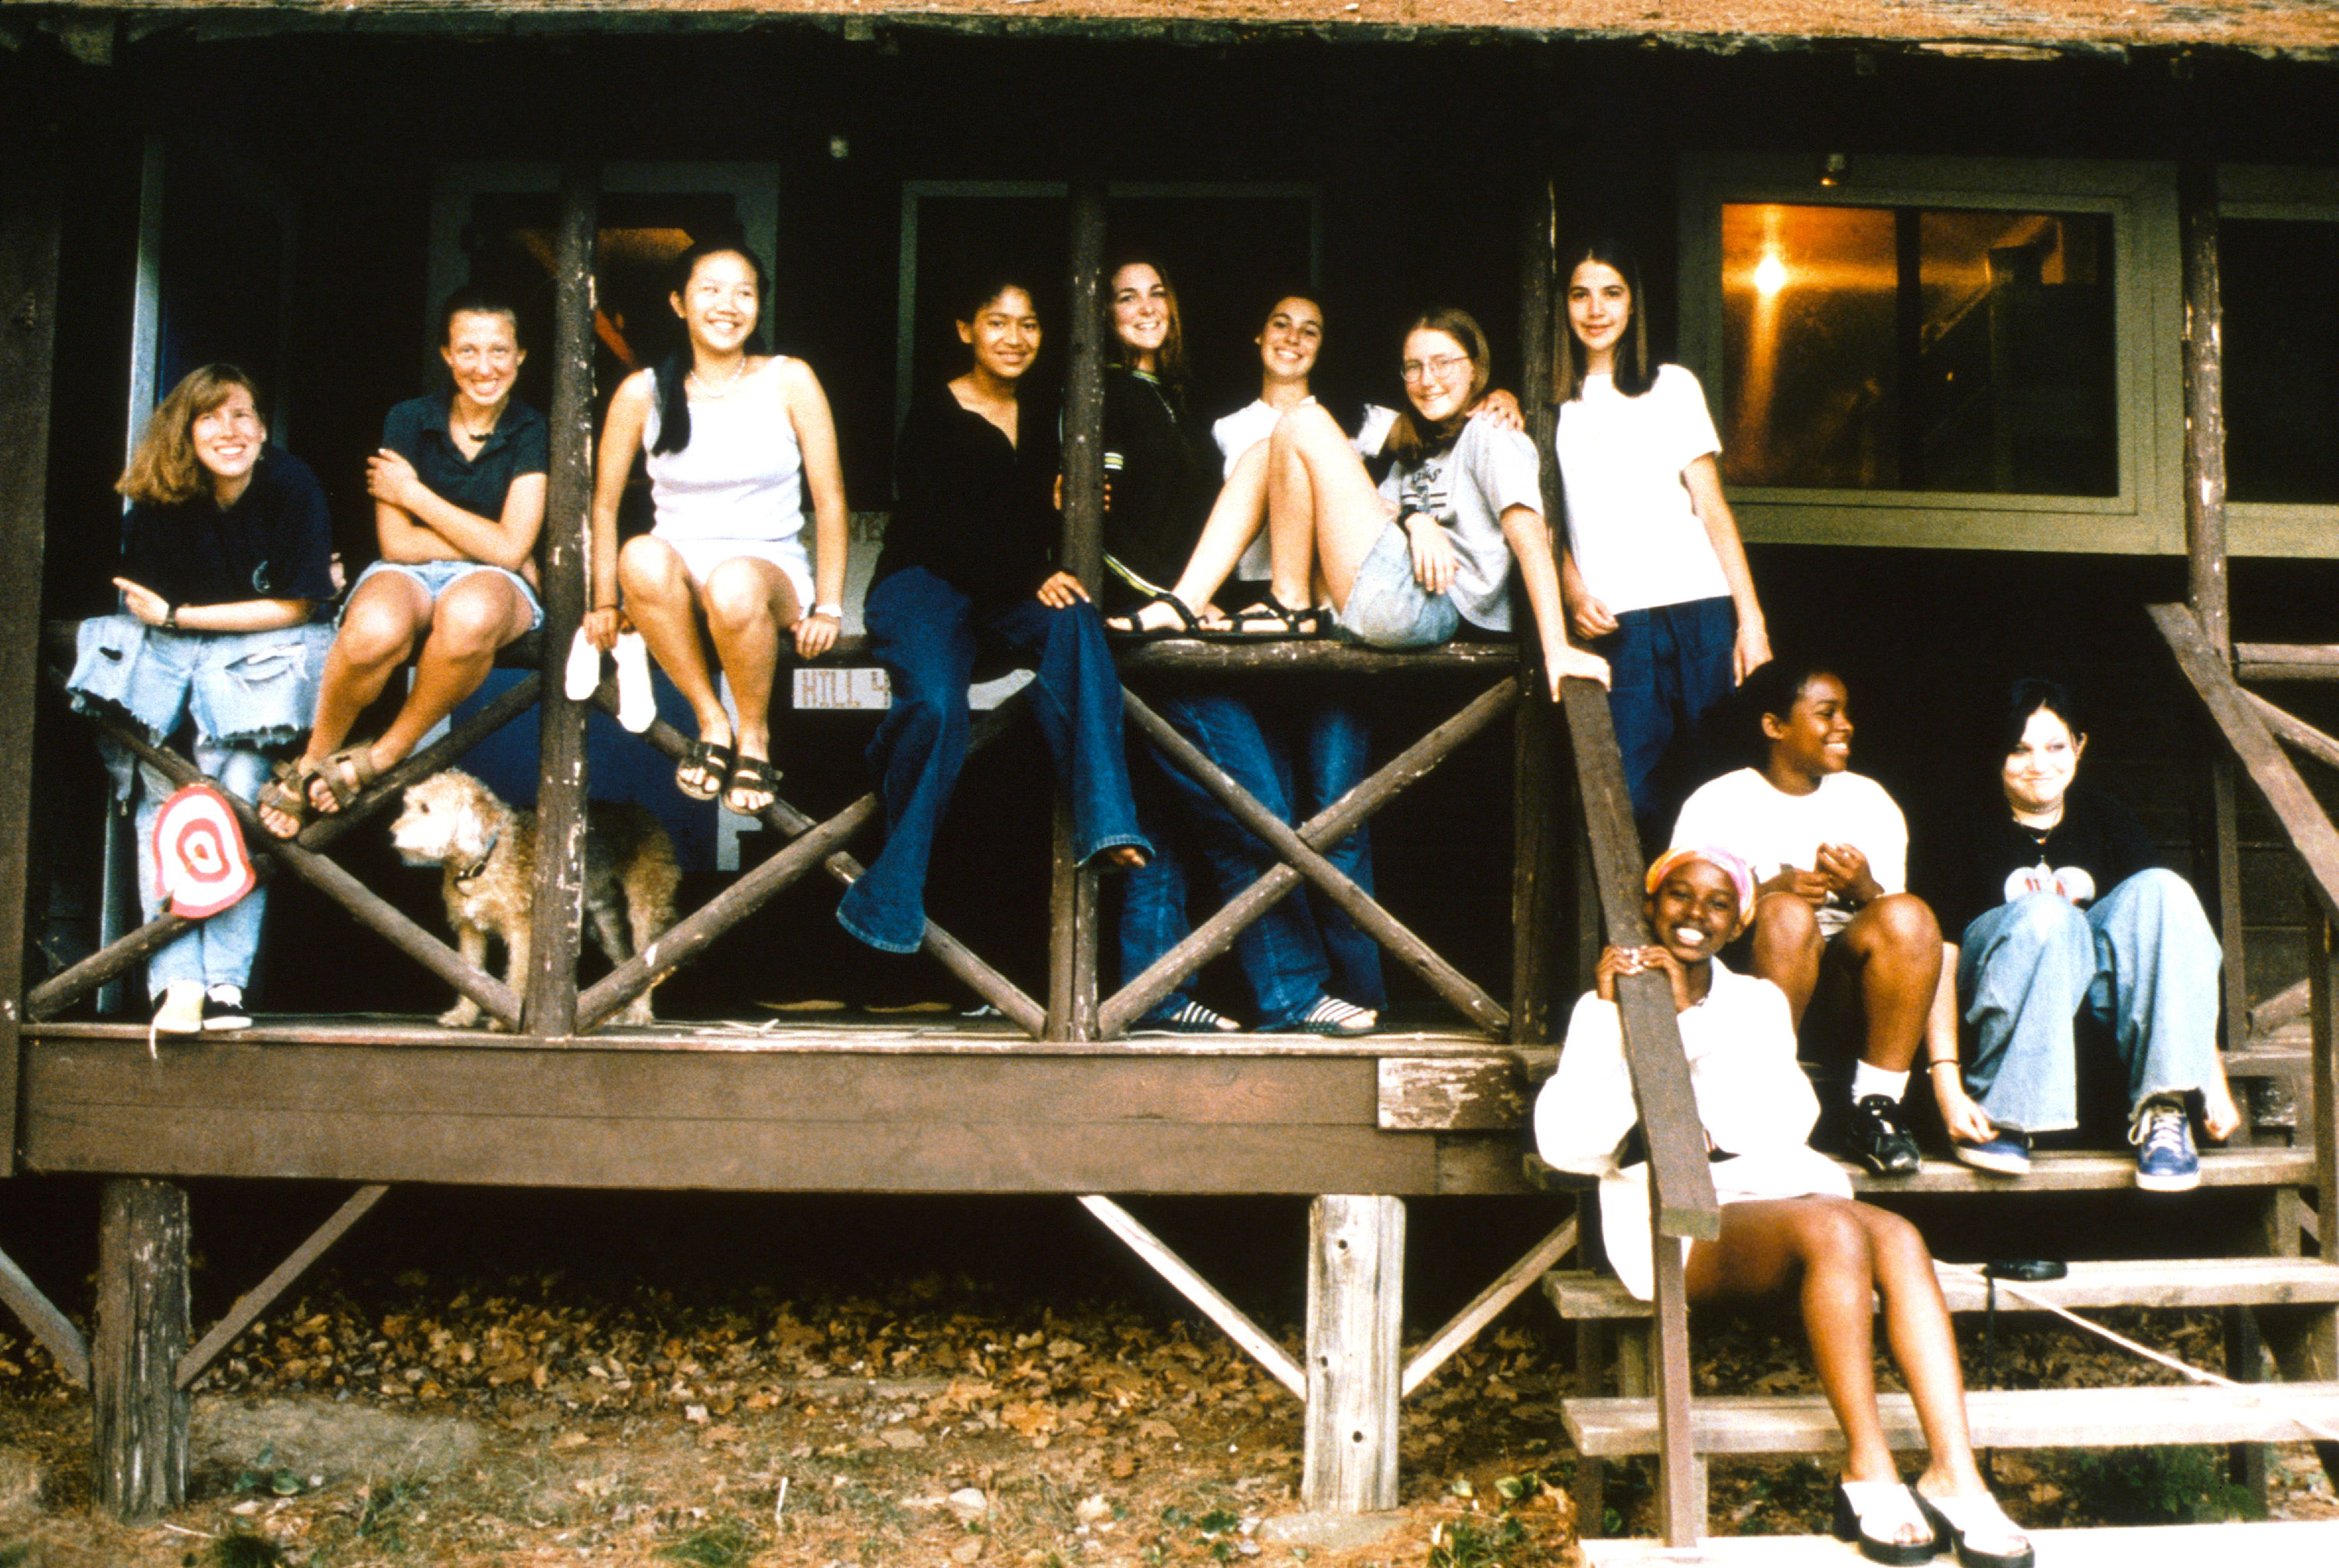 cast posing on the porch of a cabin